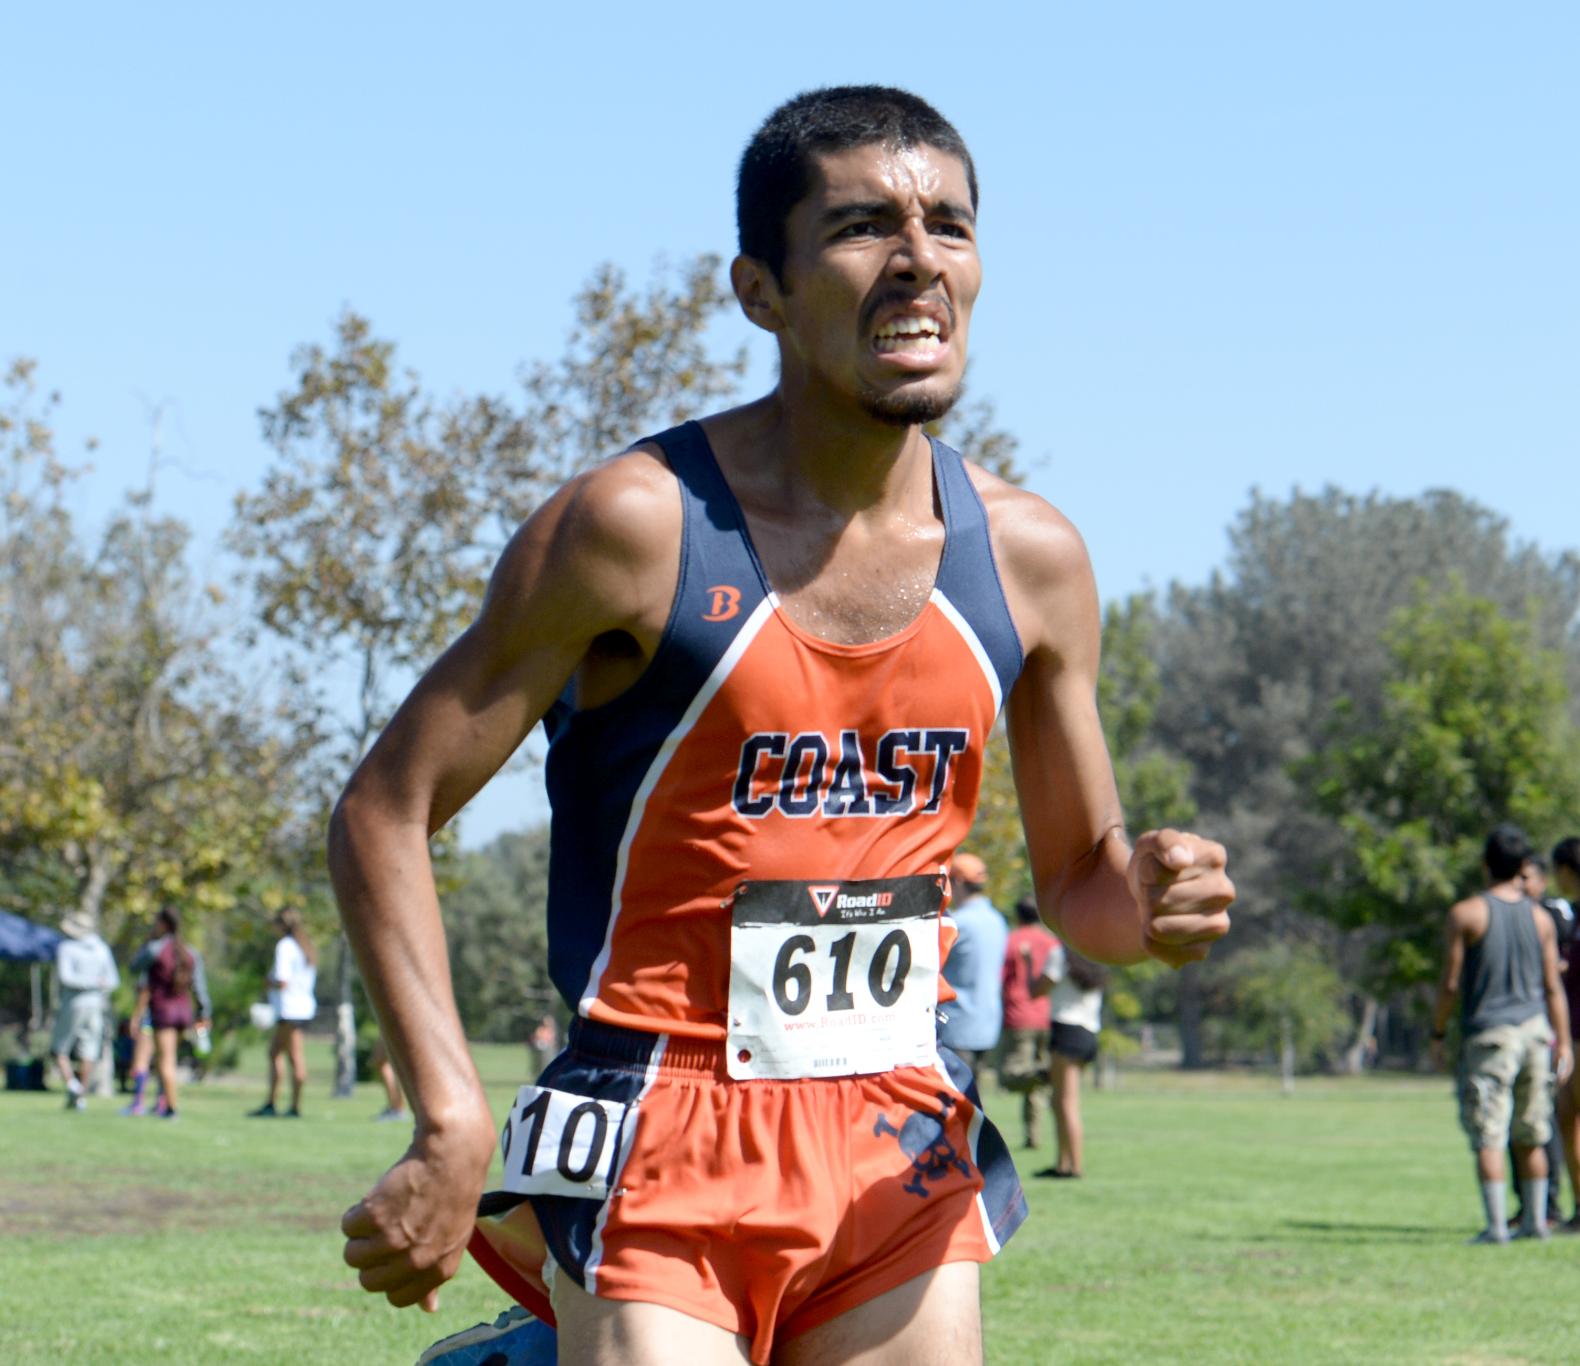 Solid team performance for Pirate men as they take third at Vanguard Invitational